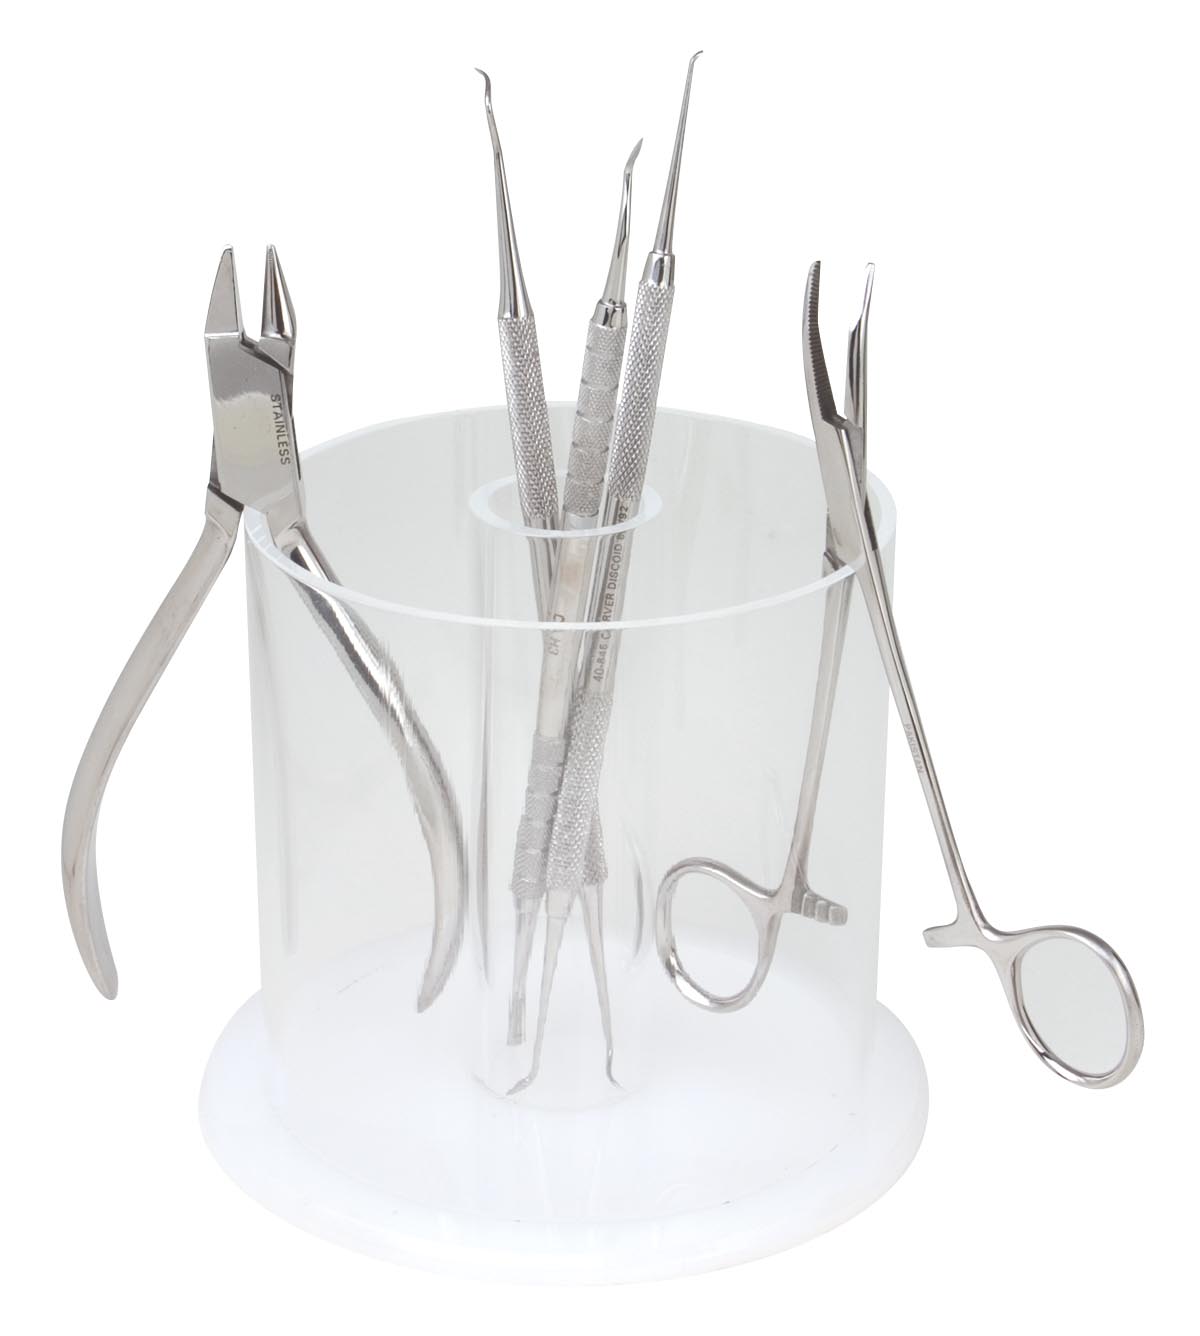 Round Instrument & Plier Rack with Tube - American Dental Accessories, Inc.